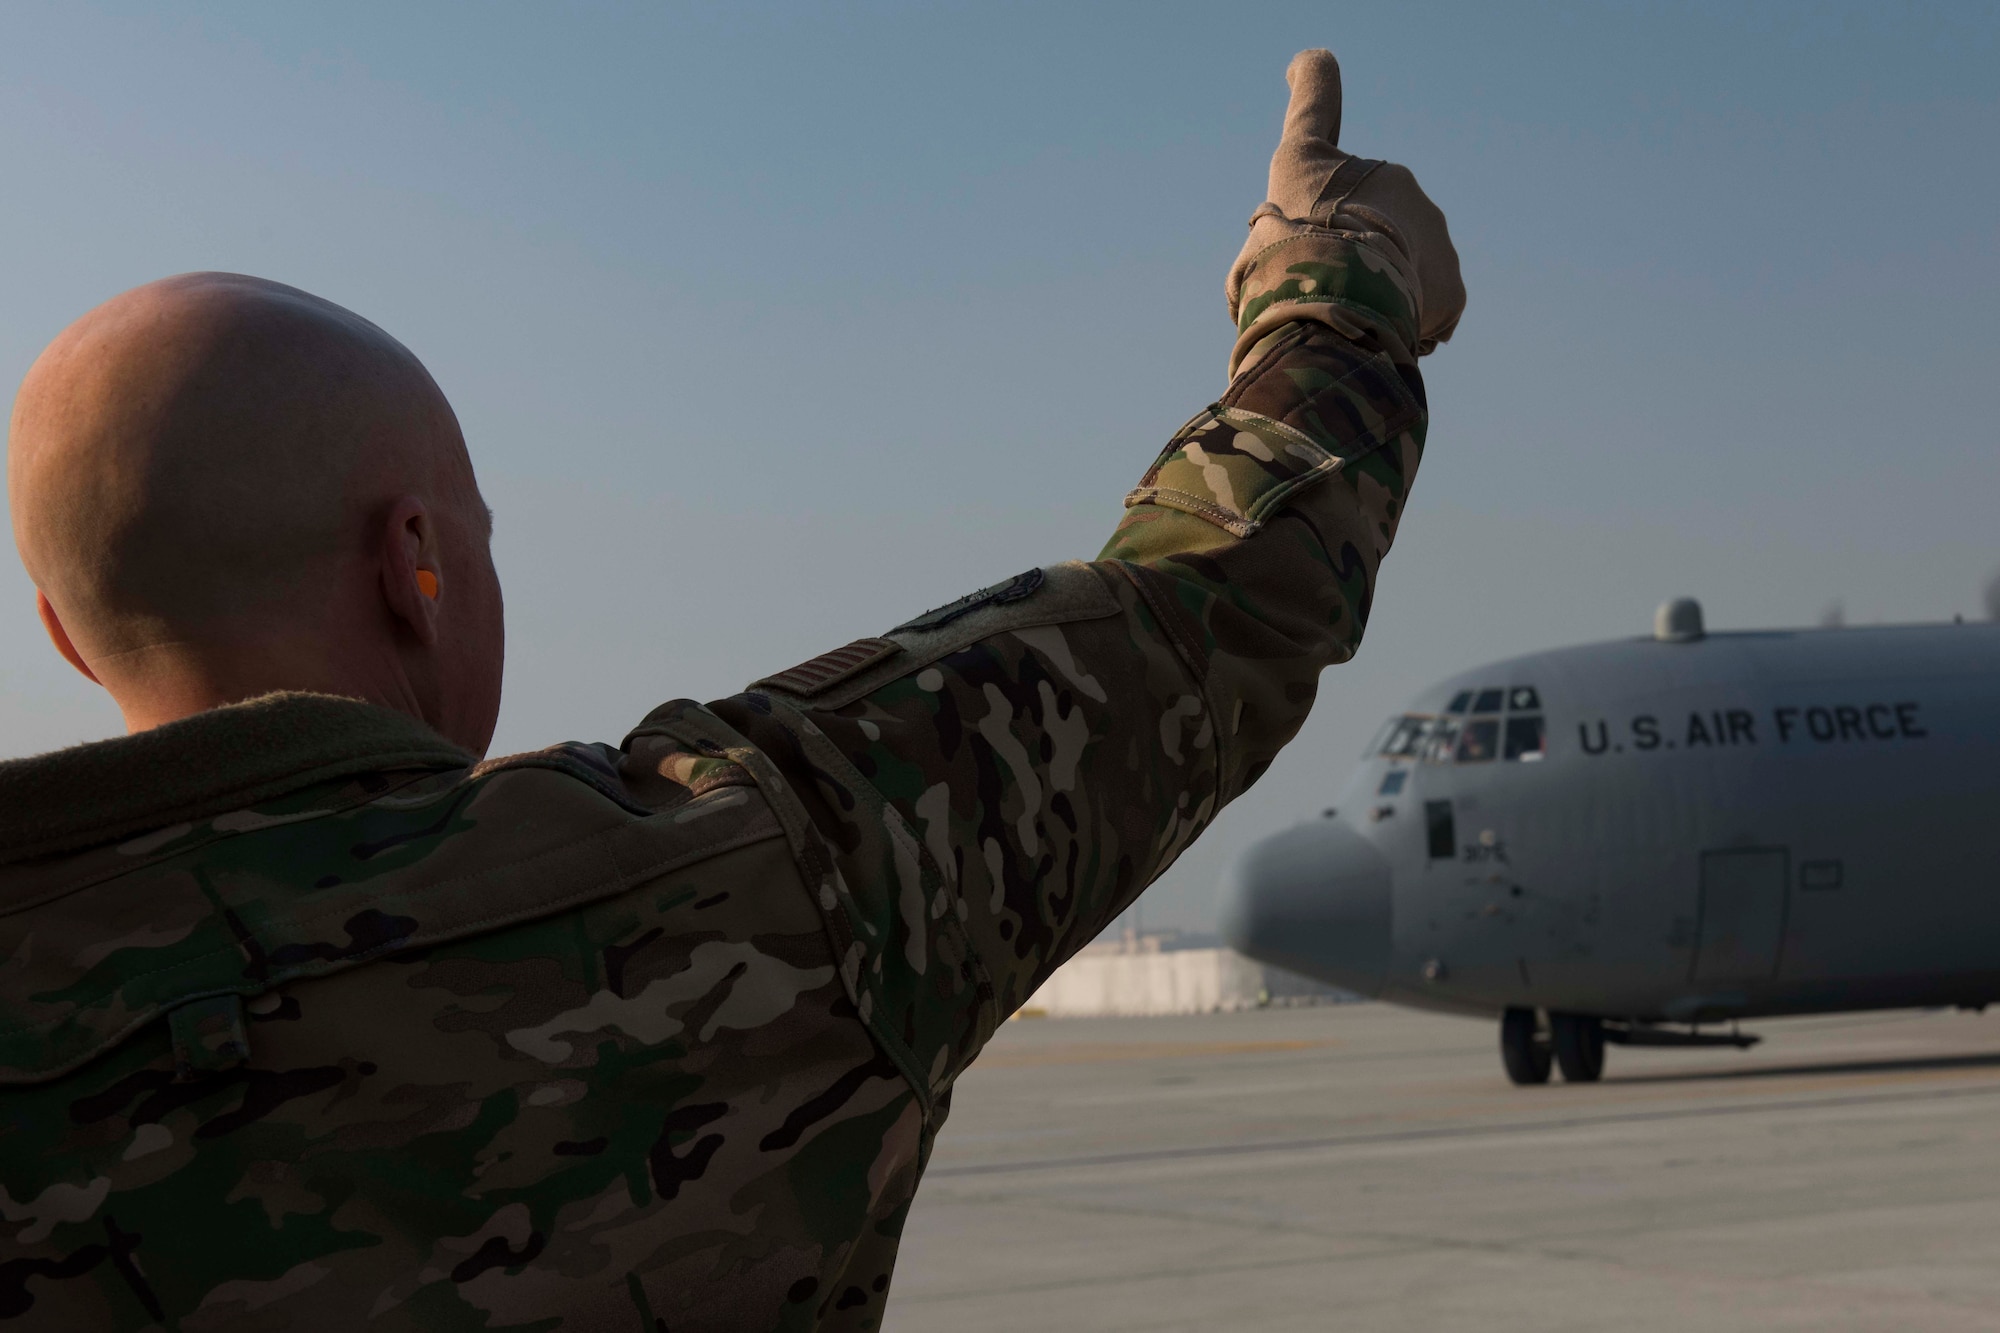 Air Force Col. Joseph Miller, 455th Air Expeditionary Wing vice commander, greets an aircraft carrying Air Force Chief of Staff David L. Goldfein and the Chief Master Sgt. of the Air Force Kaleth O. Wright during a recent visit to Bagram Airfield, Afghanistan, Dec. 25, 2018. Airmen were given the opportunity to discuss changes occurring in the Air Force with leadership during the visit. (U.S. Air Force photo by Senior Airman Kaylee Dubois)